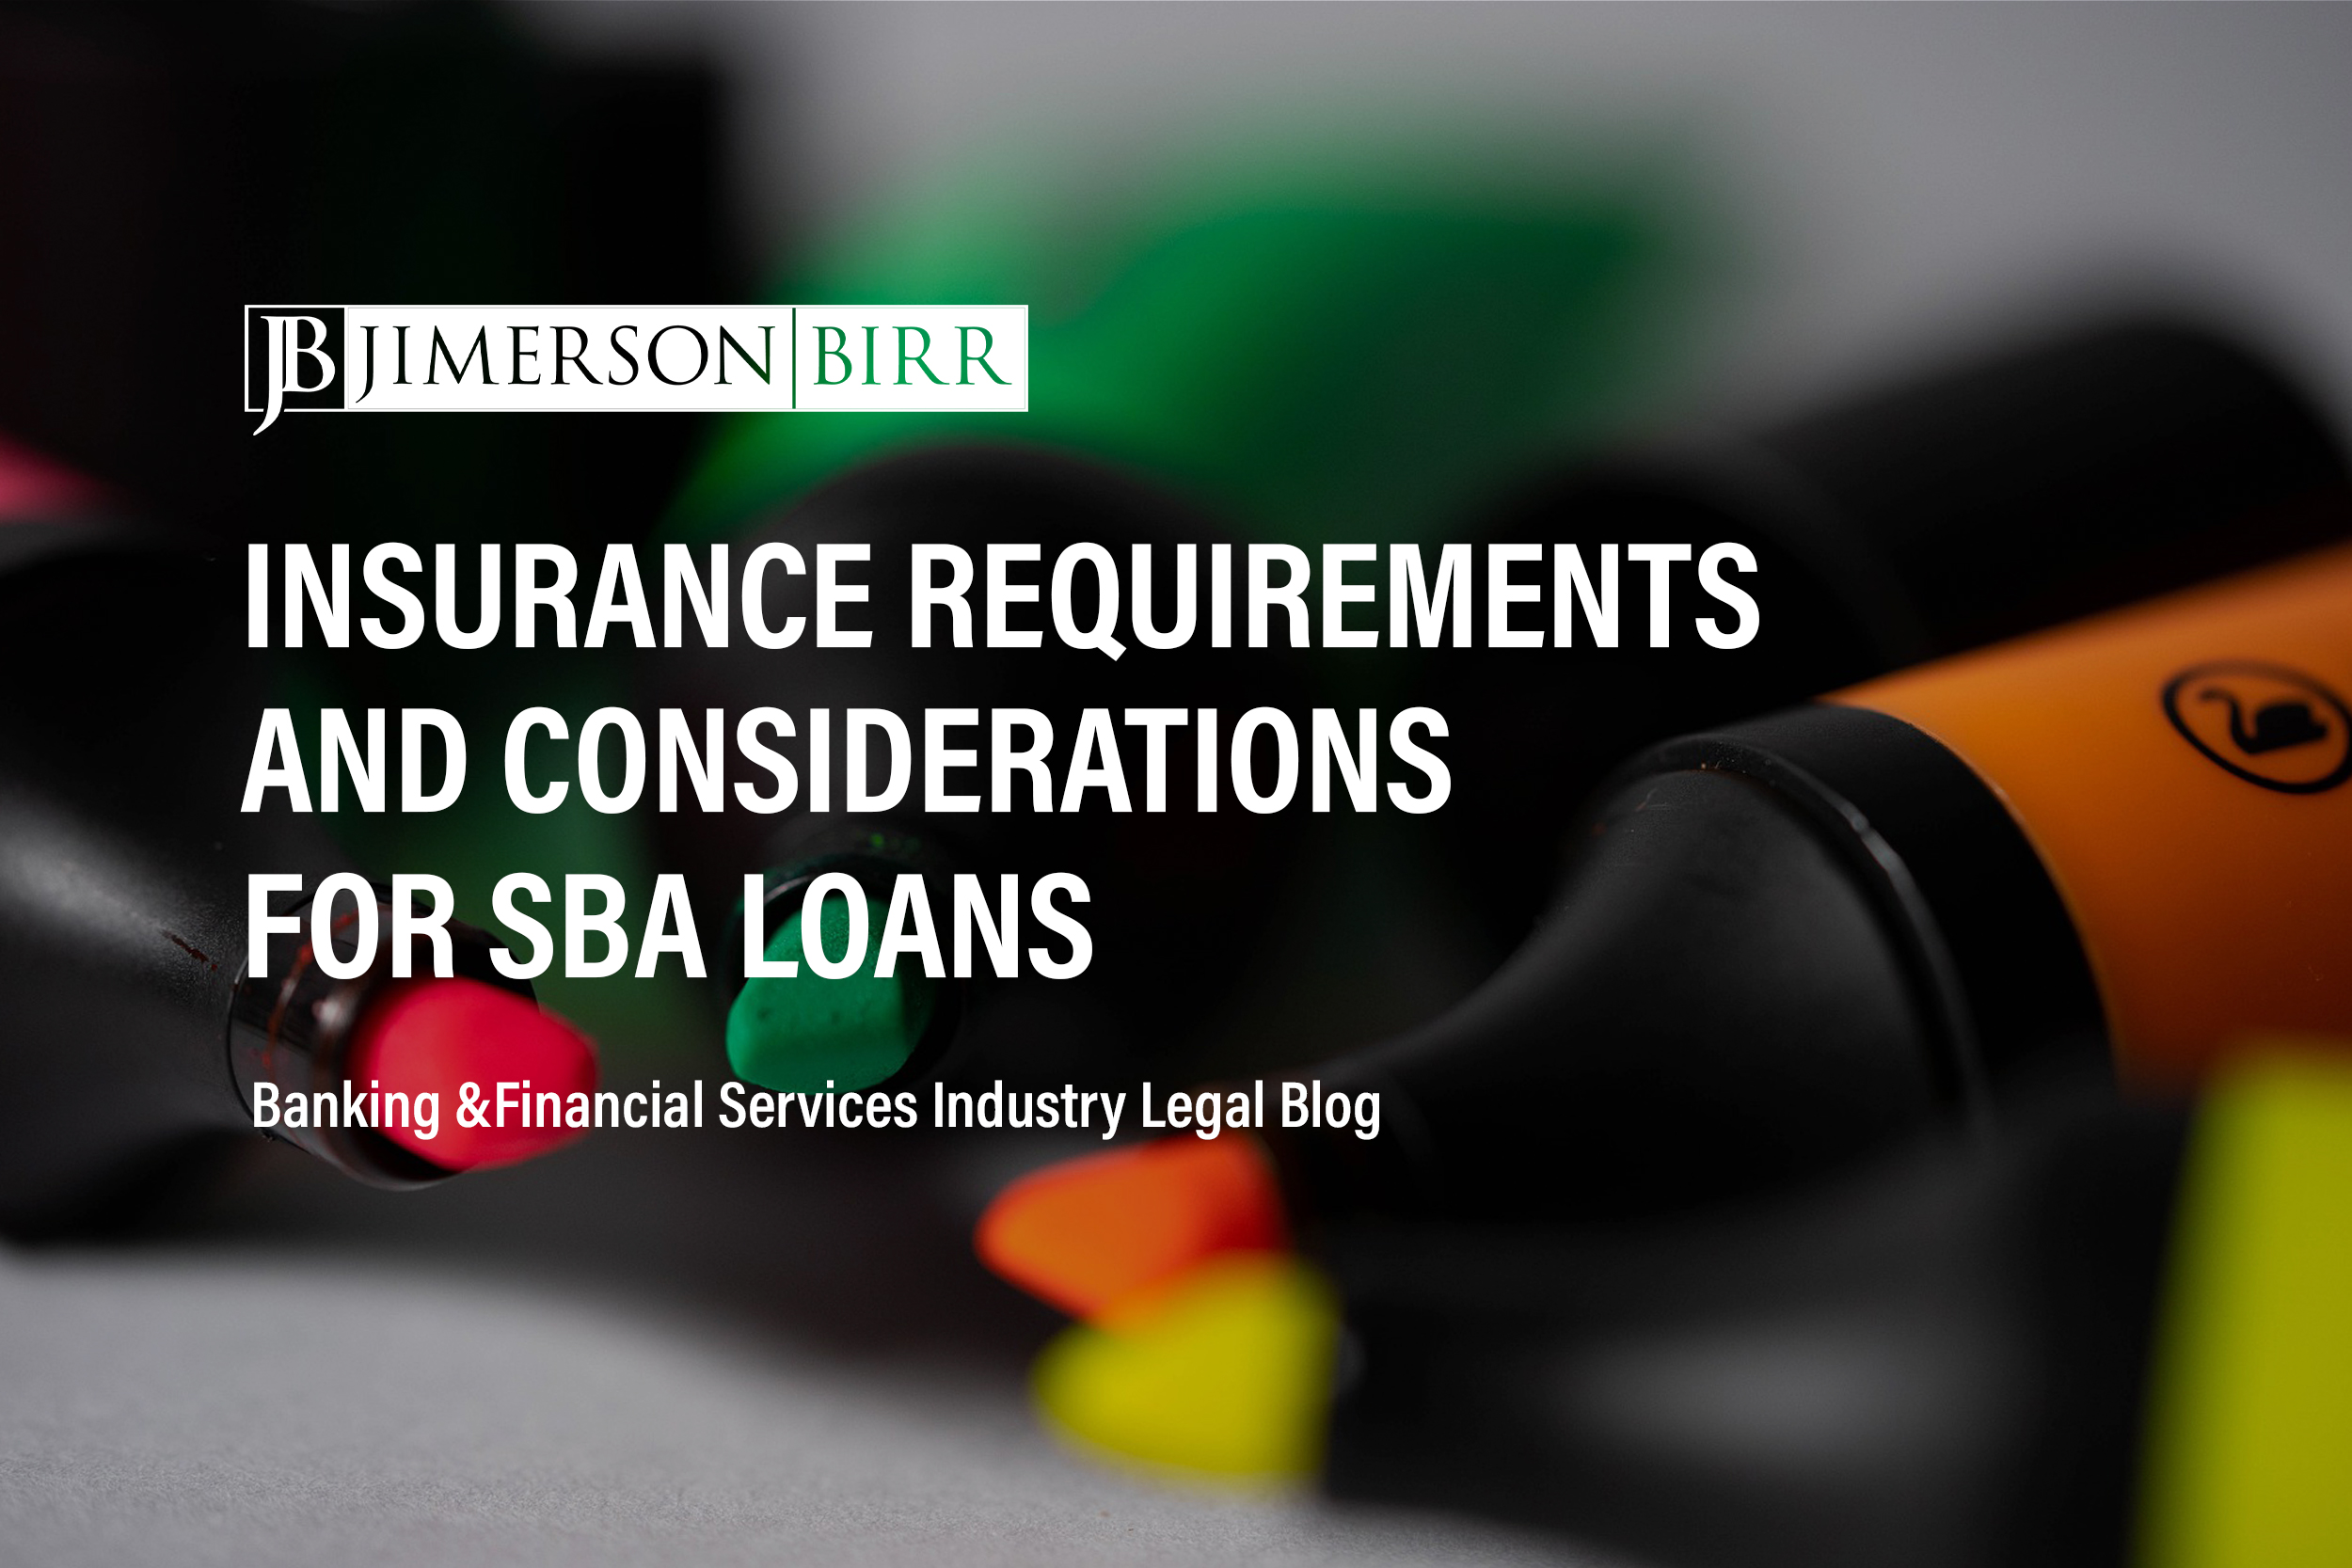 SBA Loans: Insurance Requirements and Considerations